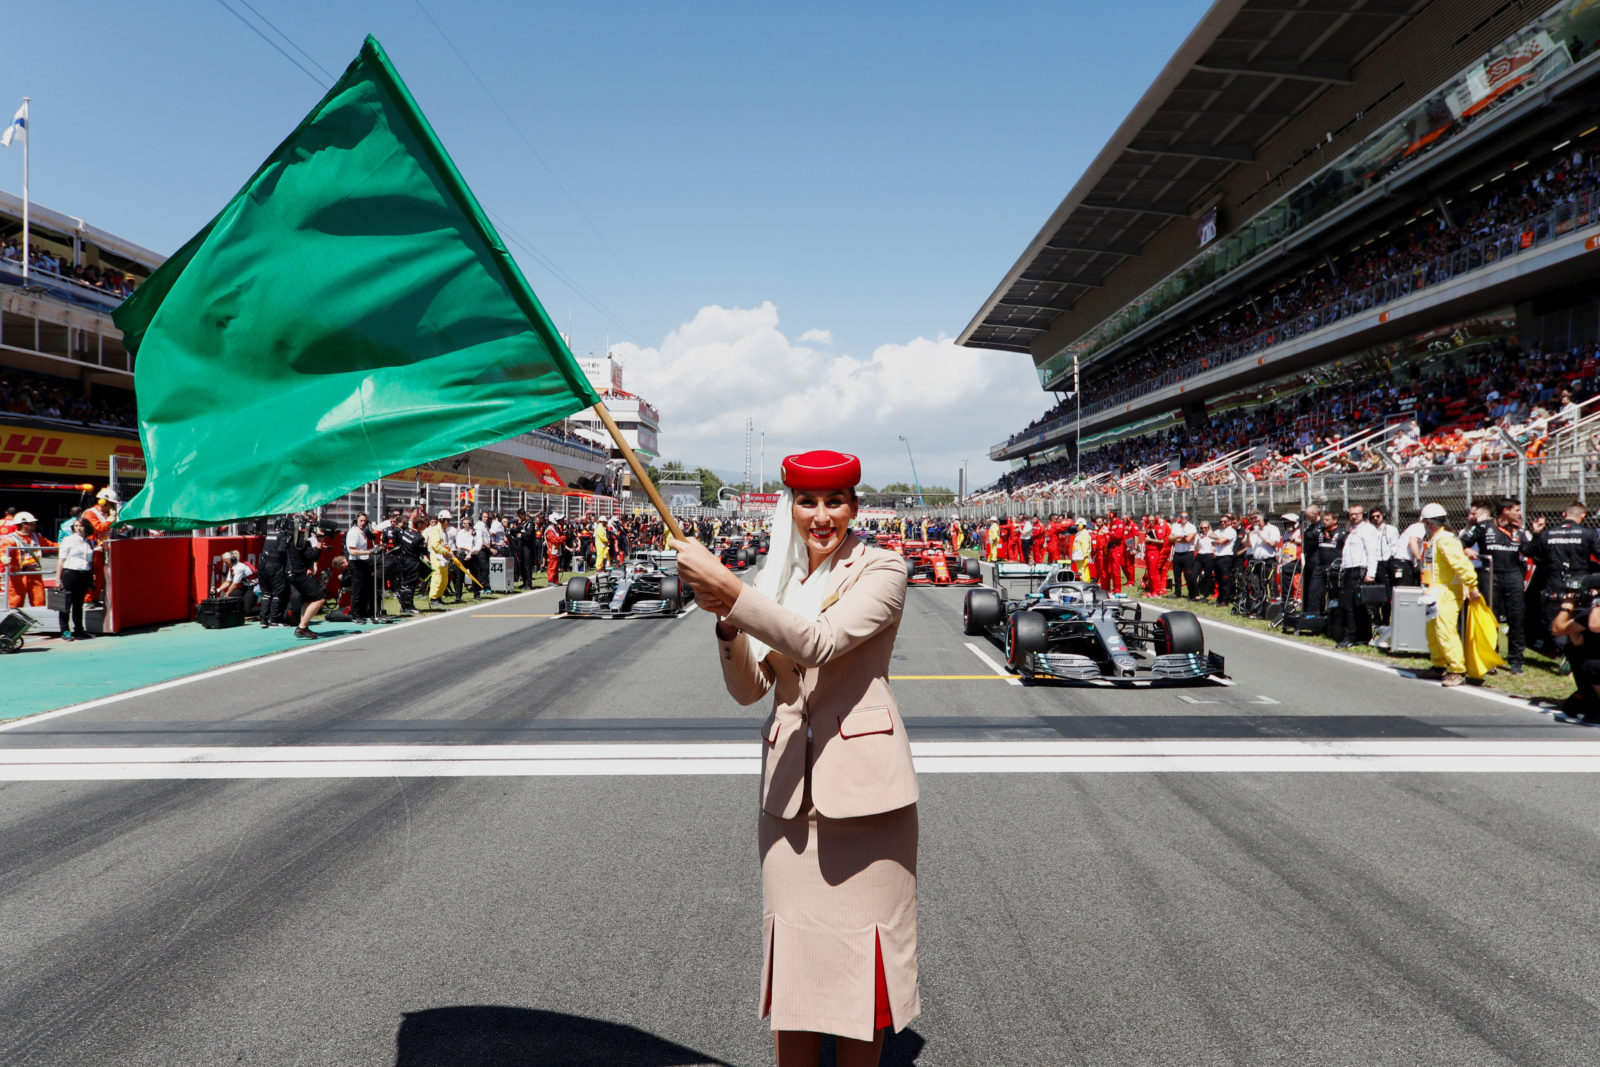 a woman holding a green flag in front of a crowd of people